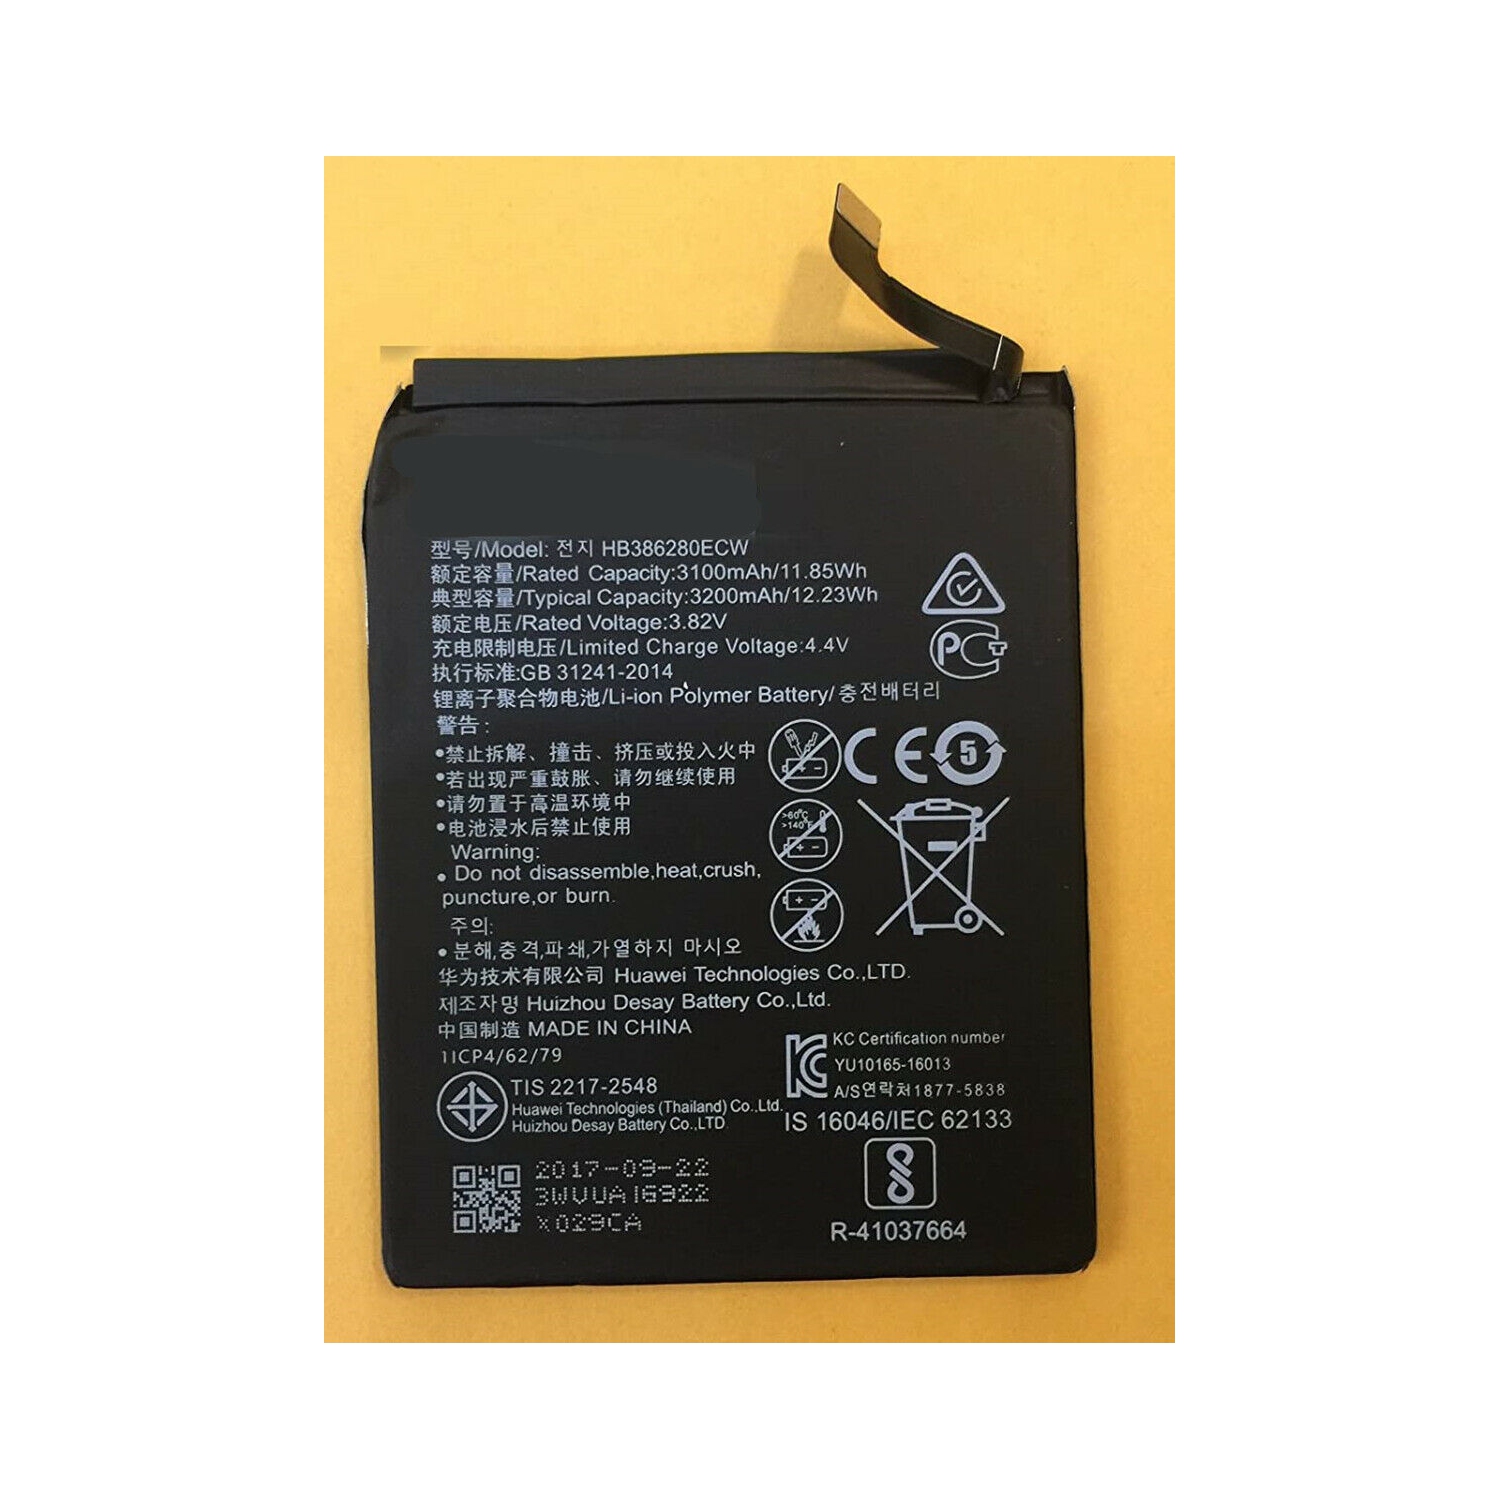 Replacement Battery - Compatible with Huawei P10 Honor 9 HB386280ECW